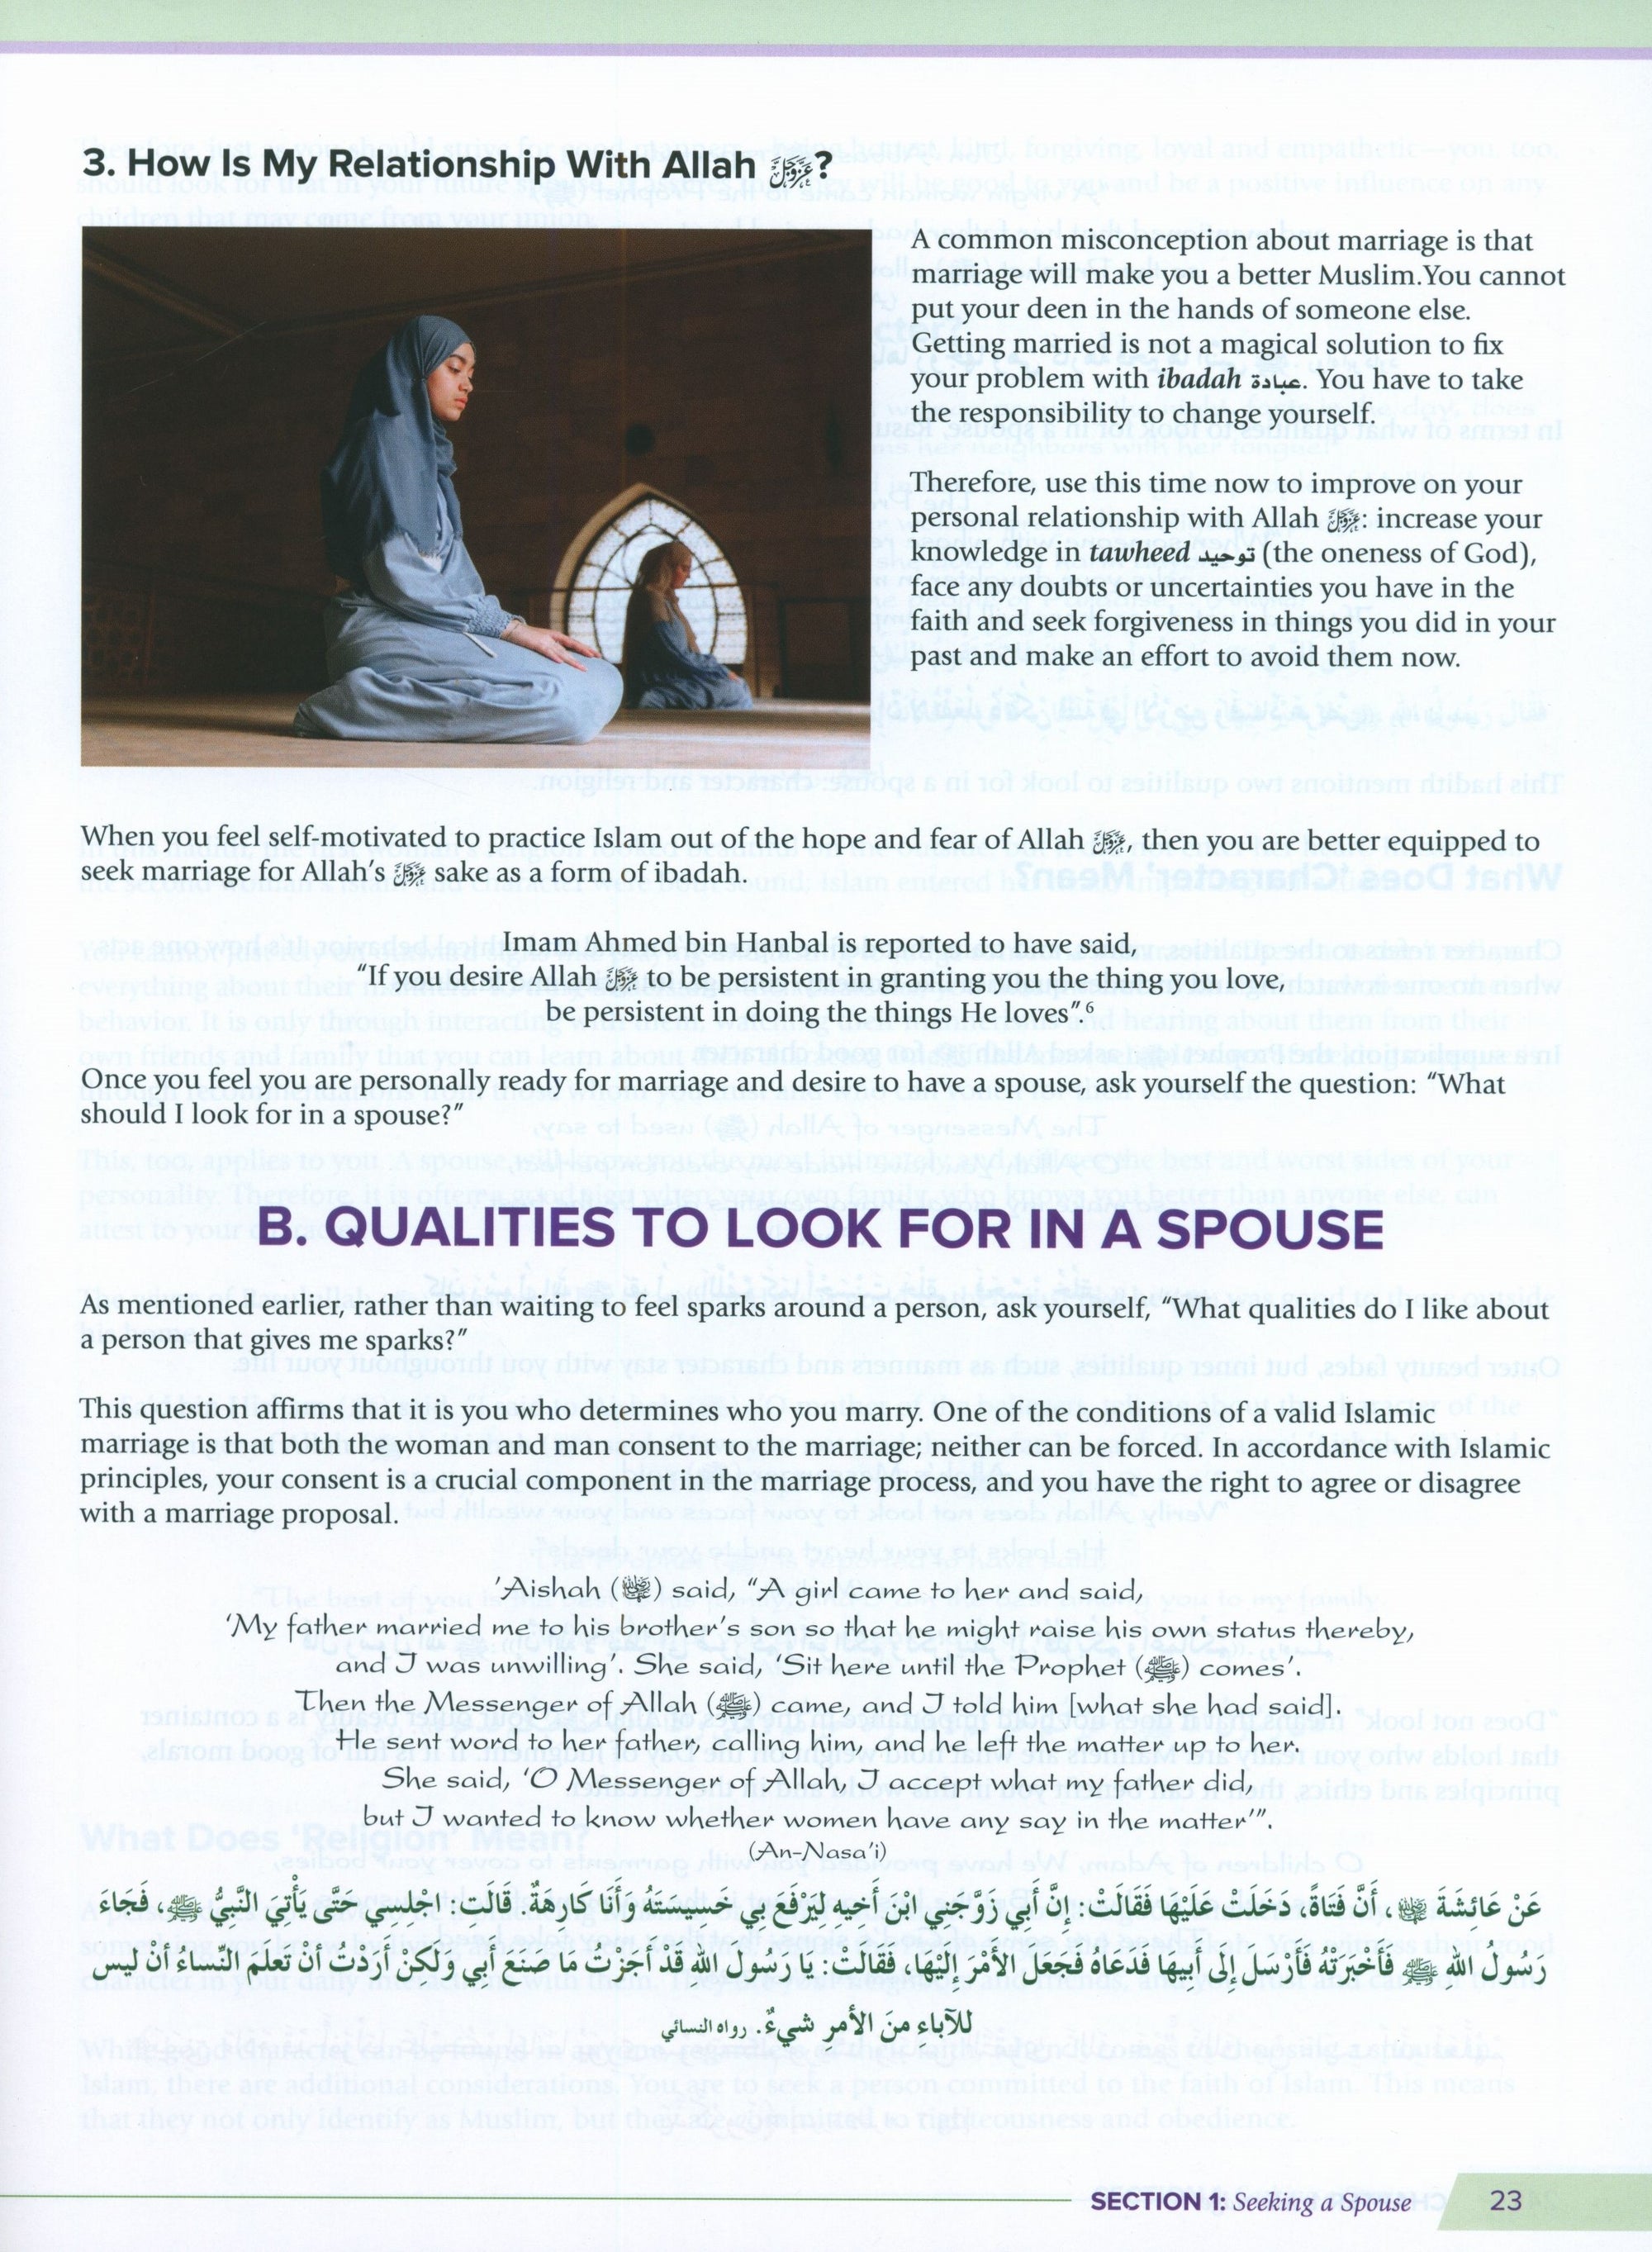 Health and Wellness  (From an Islamic Perspective) Leve 6